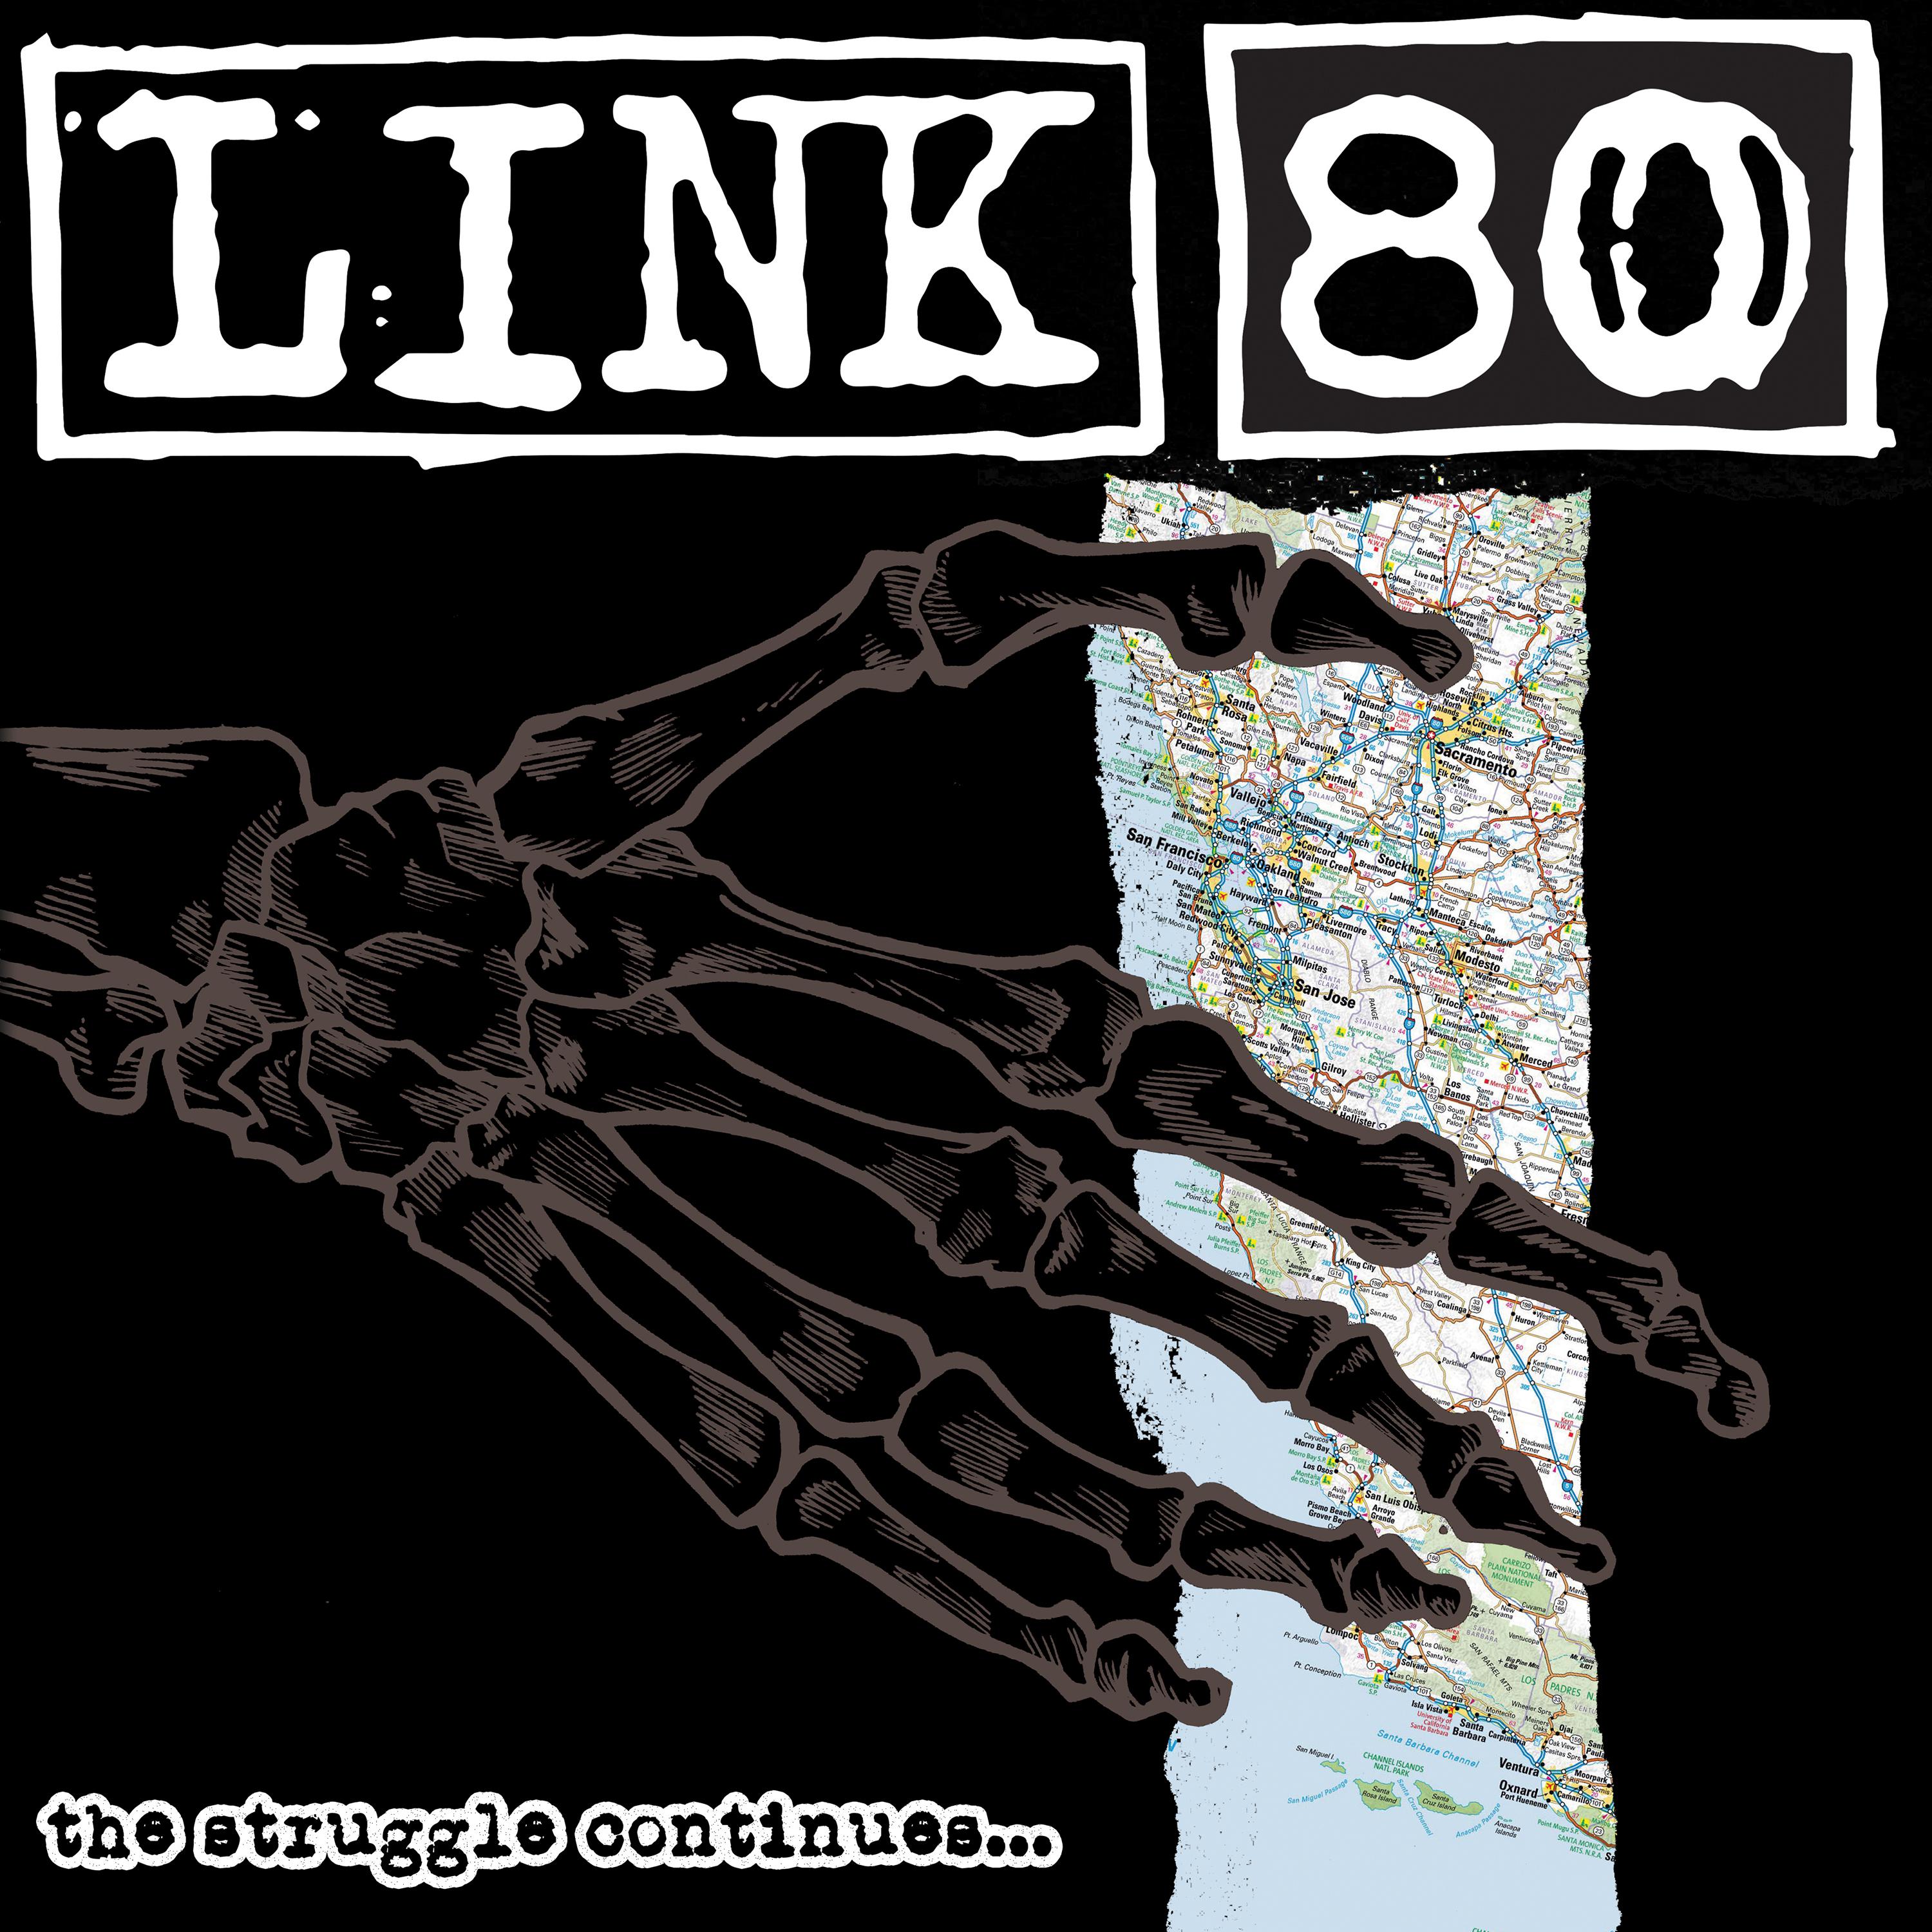 Link 80 - Face Down